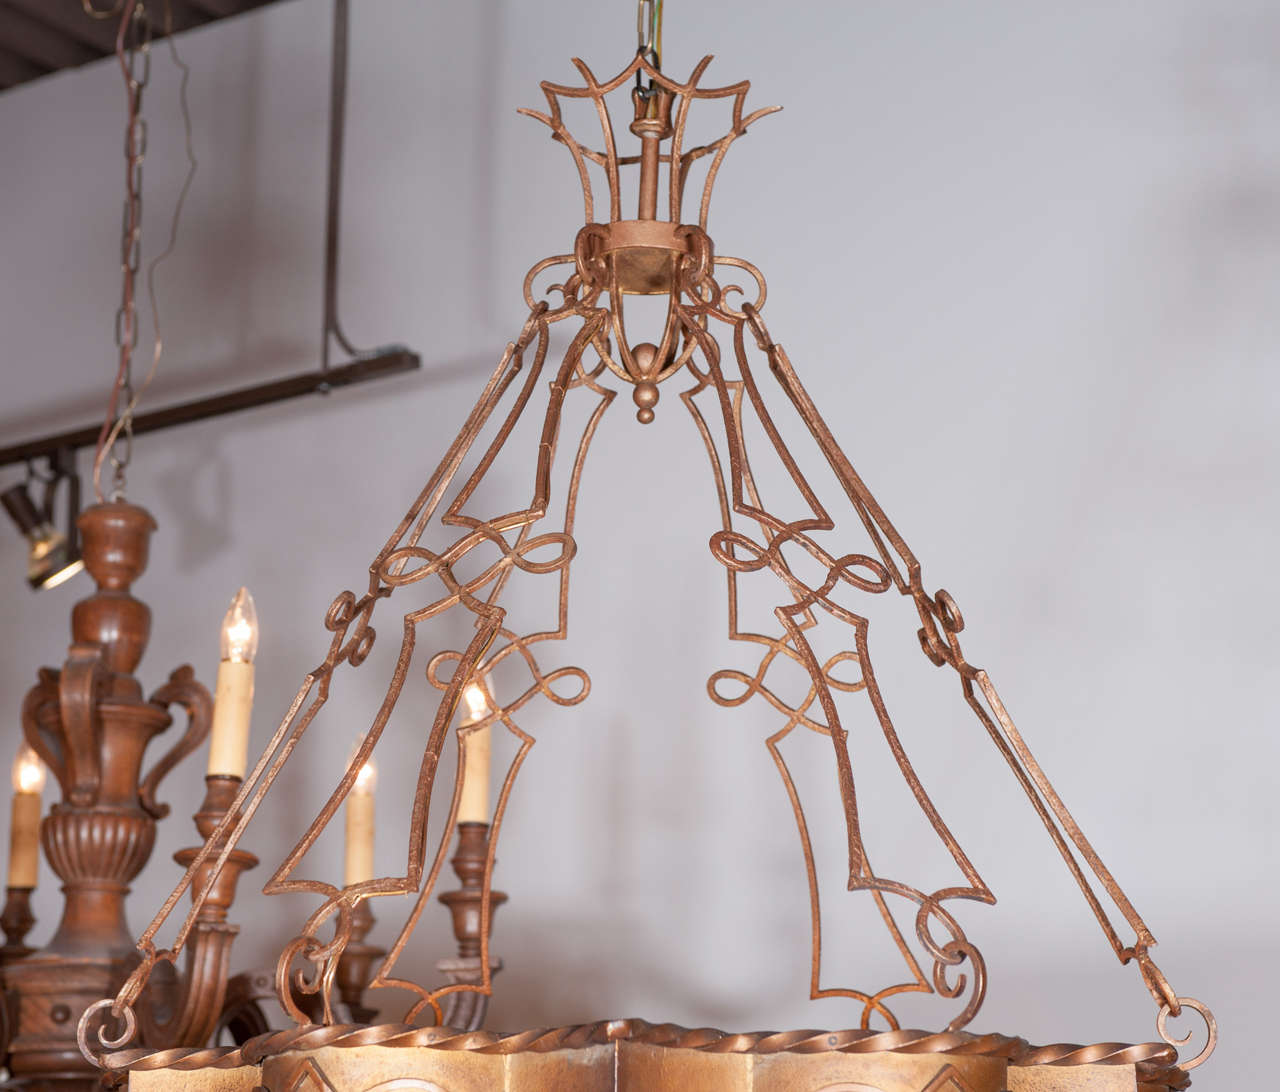 20th Century French Deco Hand Forged Metal/Glass Chandelier, c. 1910 Paris 1